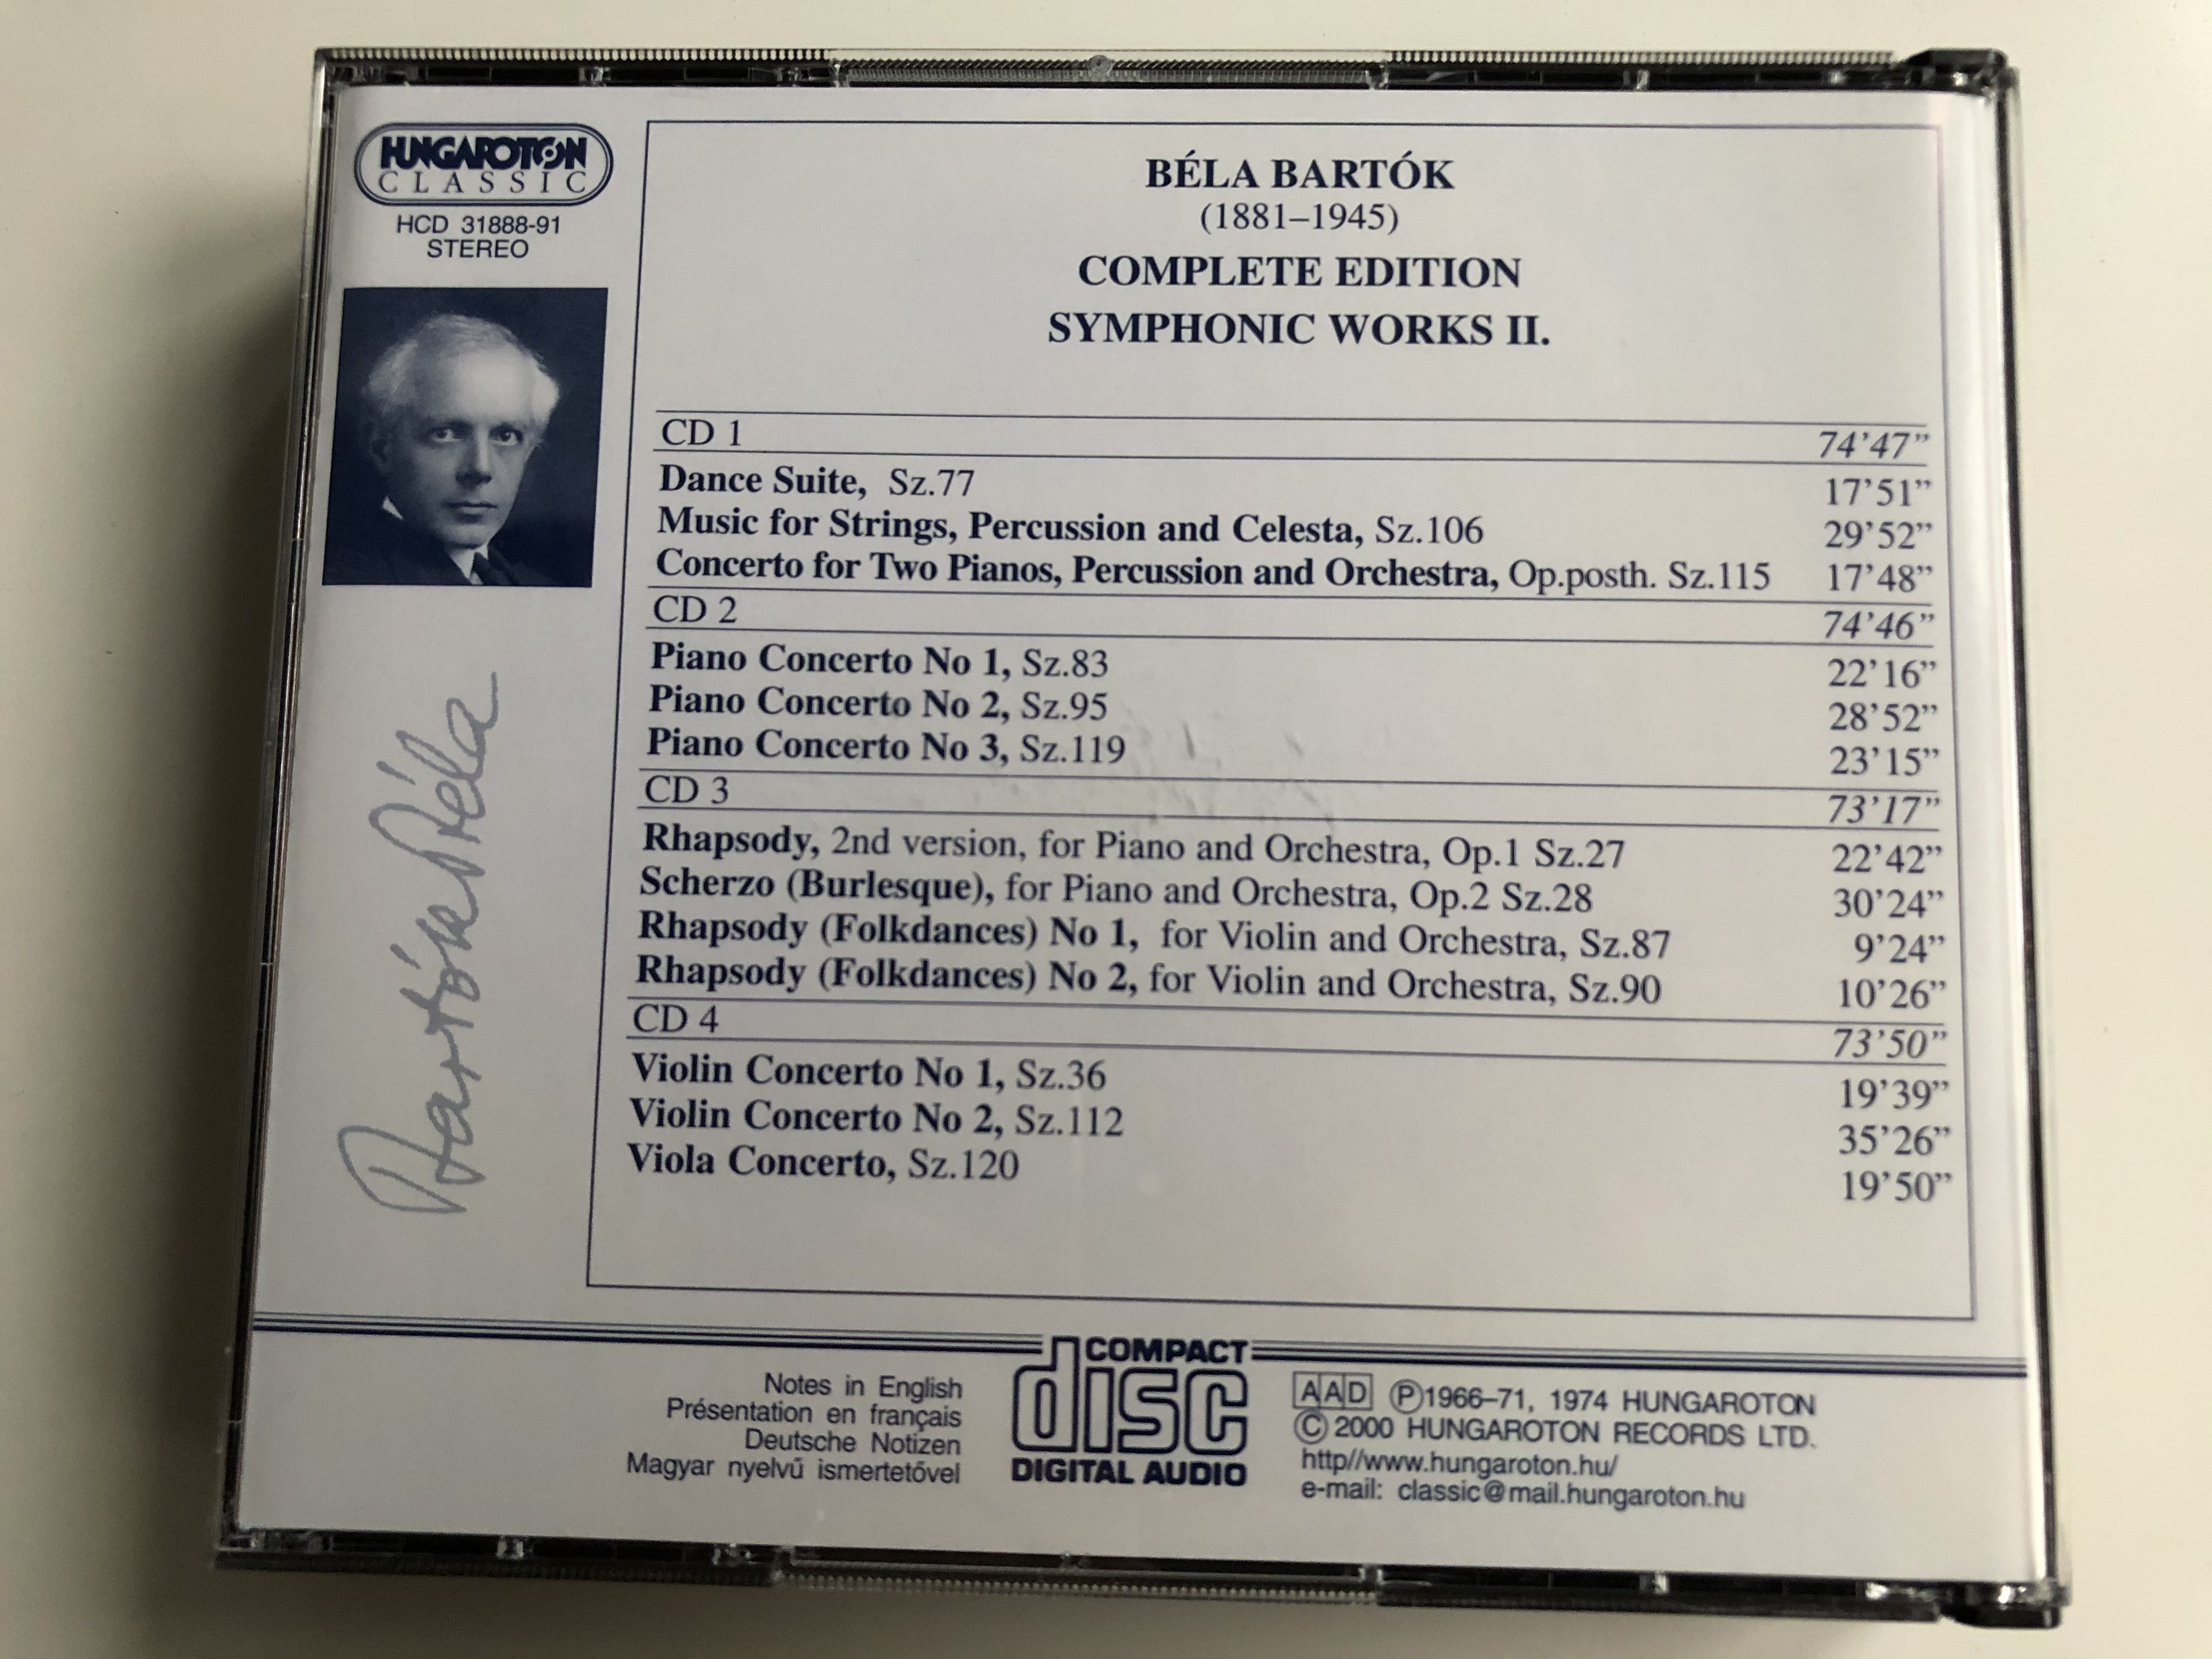 bartok-complete-edition-symphonic-works-ii.-dance-suite-music-for-strings-percussion-and-celesta-concerto-for-two-pianos-percussion-and-orchestra-piano-concertos-nos-1-3-rhapsody-hungar-11-.jpg